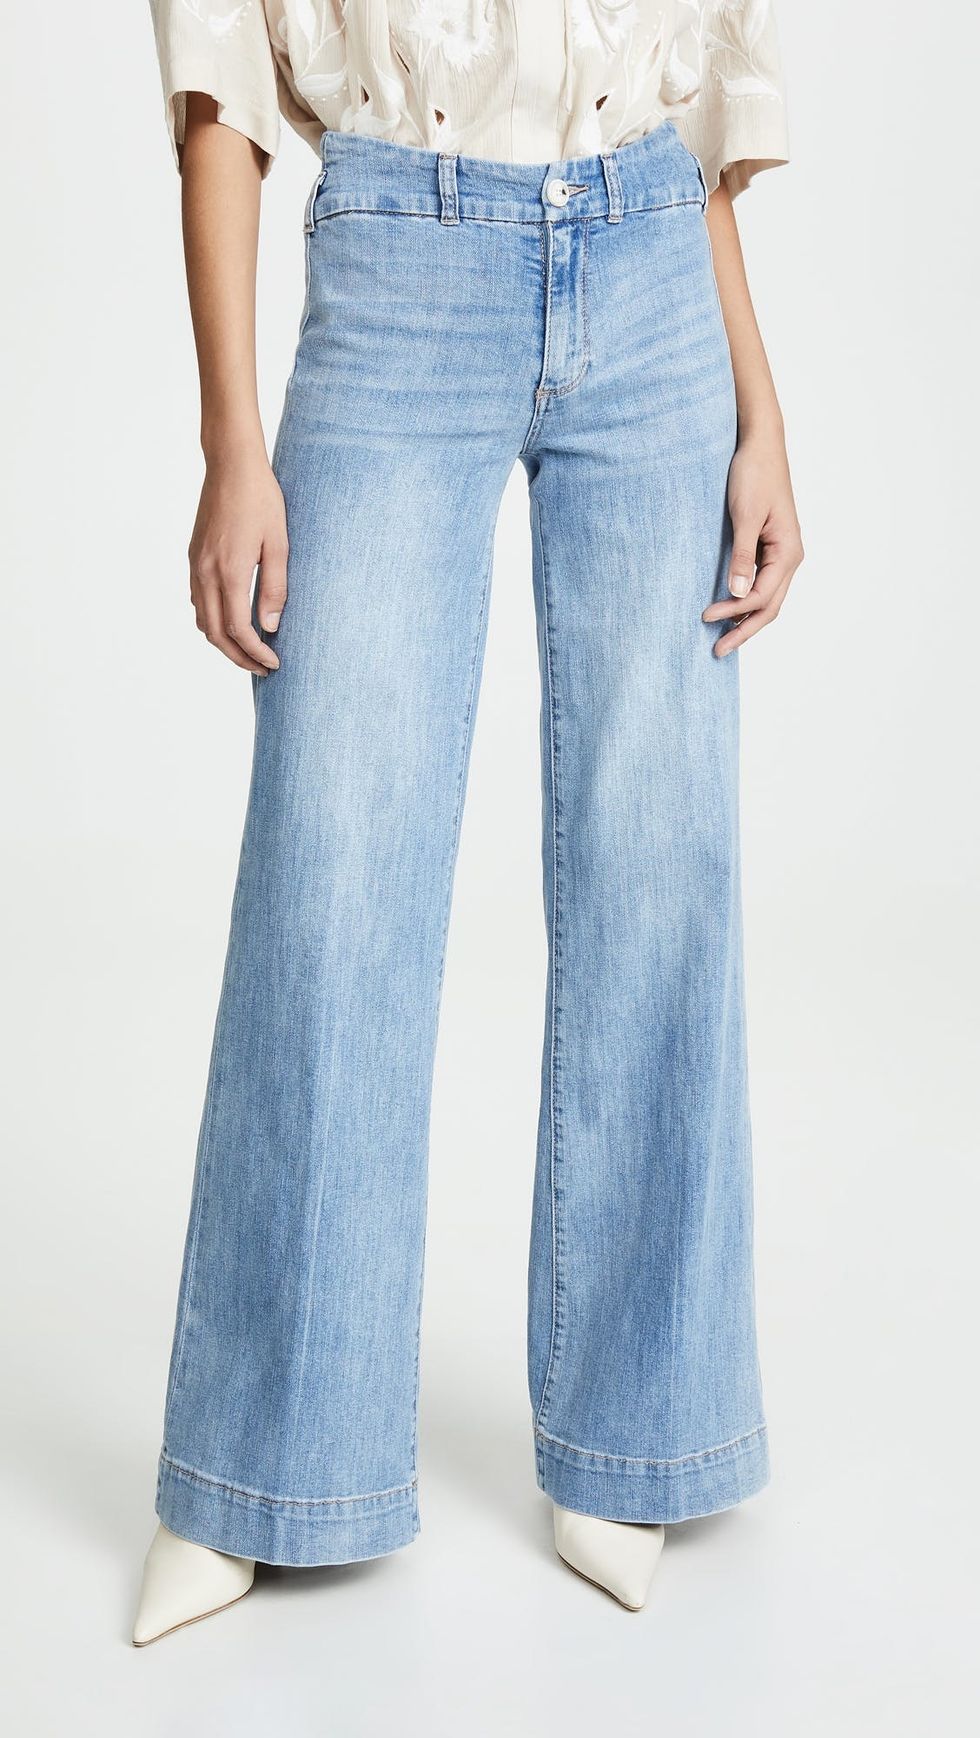 19 Denim Buys That Were Practically Made for Long-Legged Ladies - Brit + Co